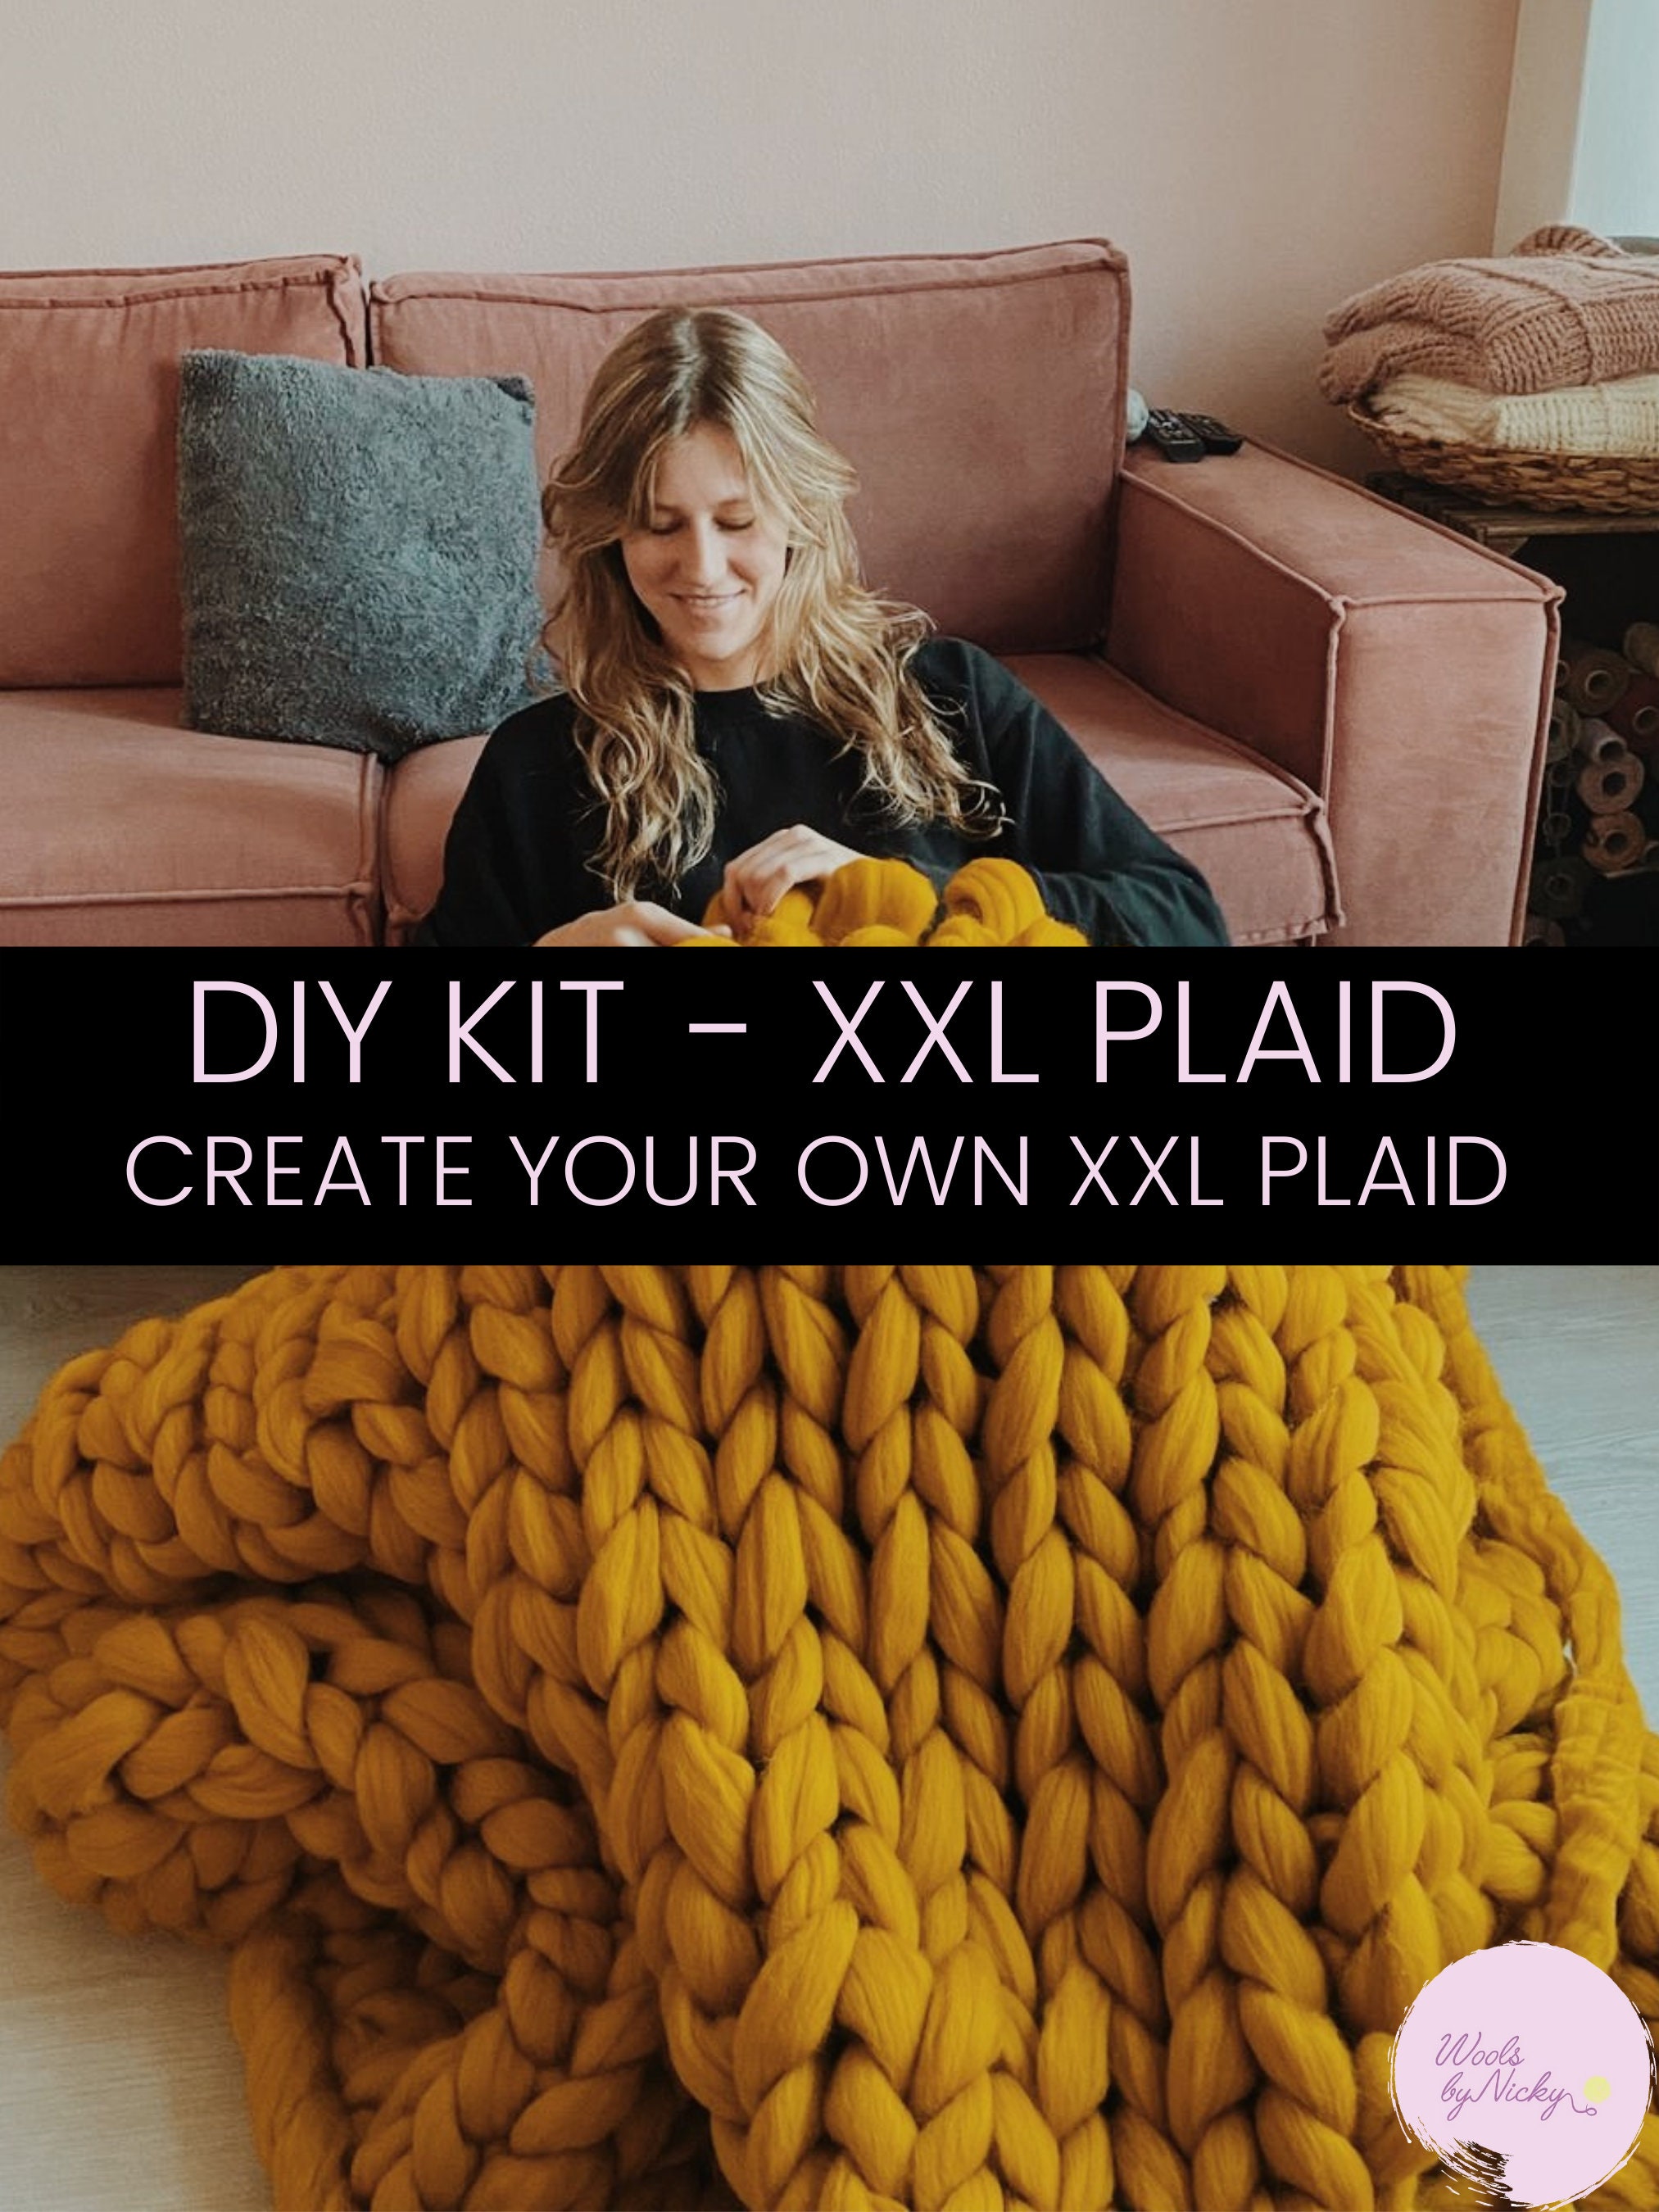 DIY No-Knit Chunky Blanket Kit with Video